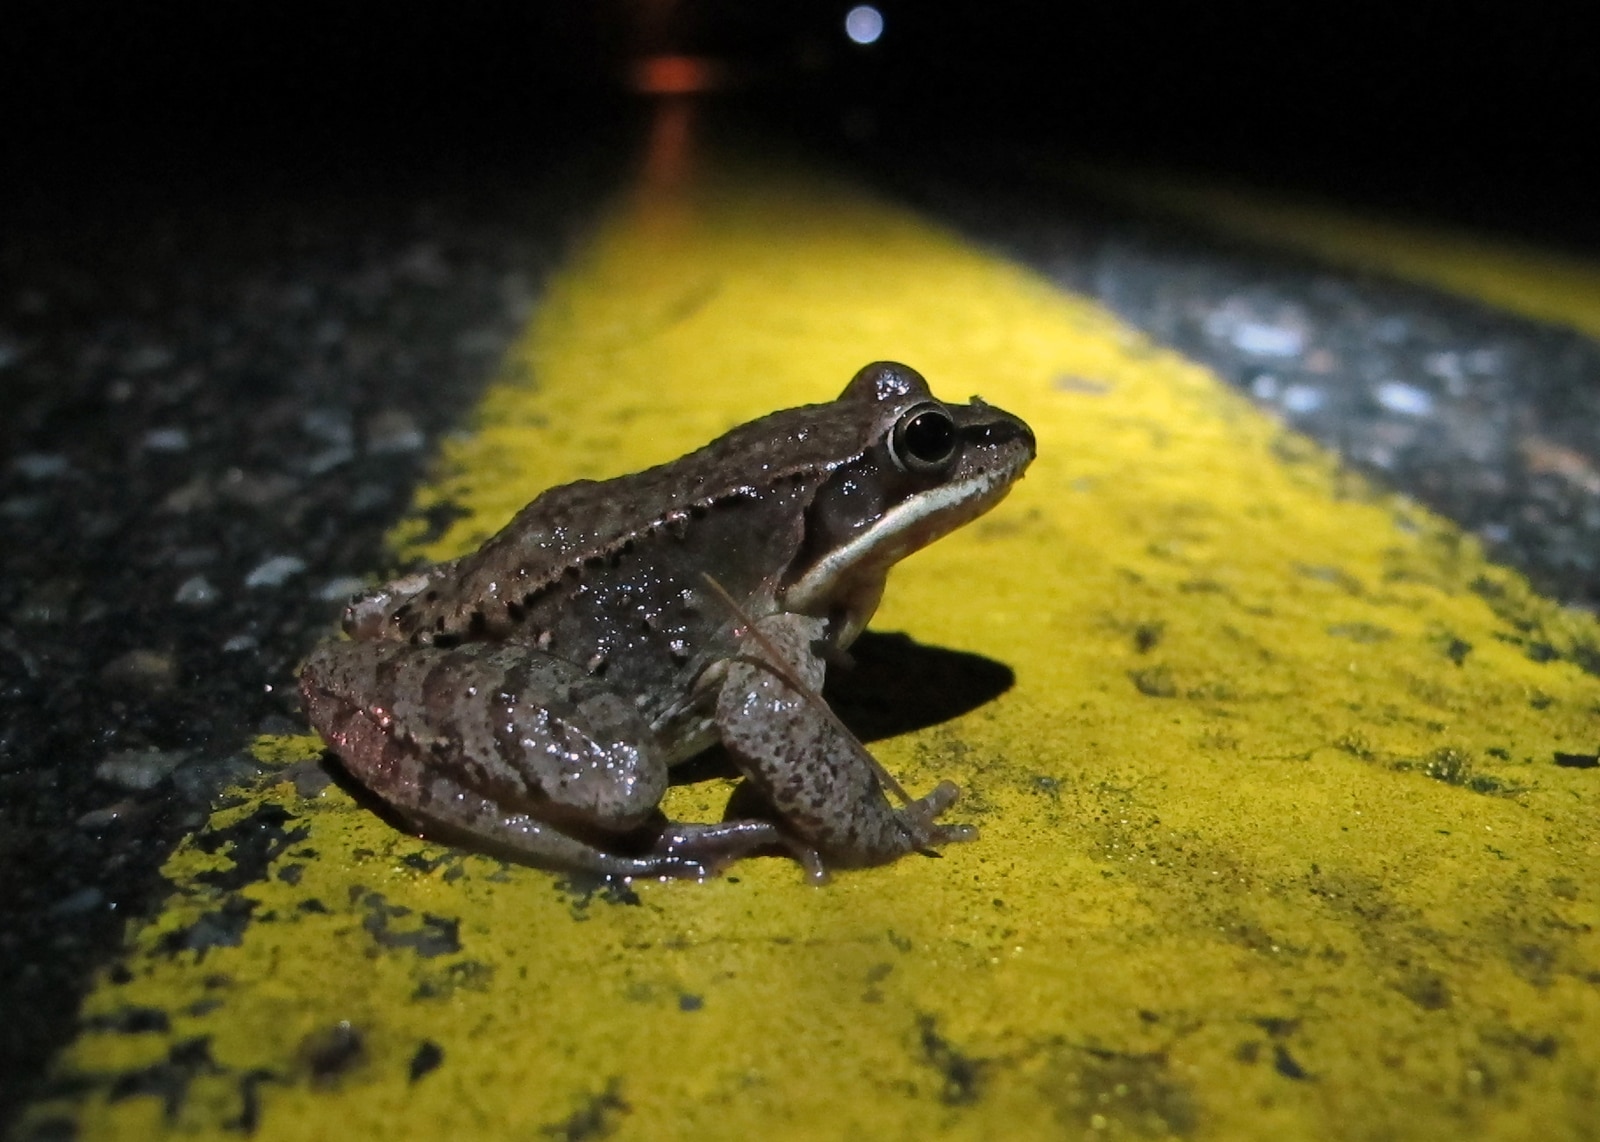 A wood frog pauses on the centerline of North Lincoln Street in Keene, NH. (photo © Brett Amy Thelen)